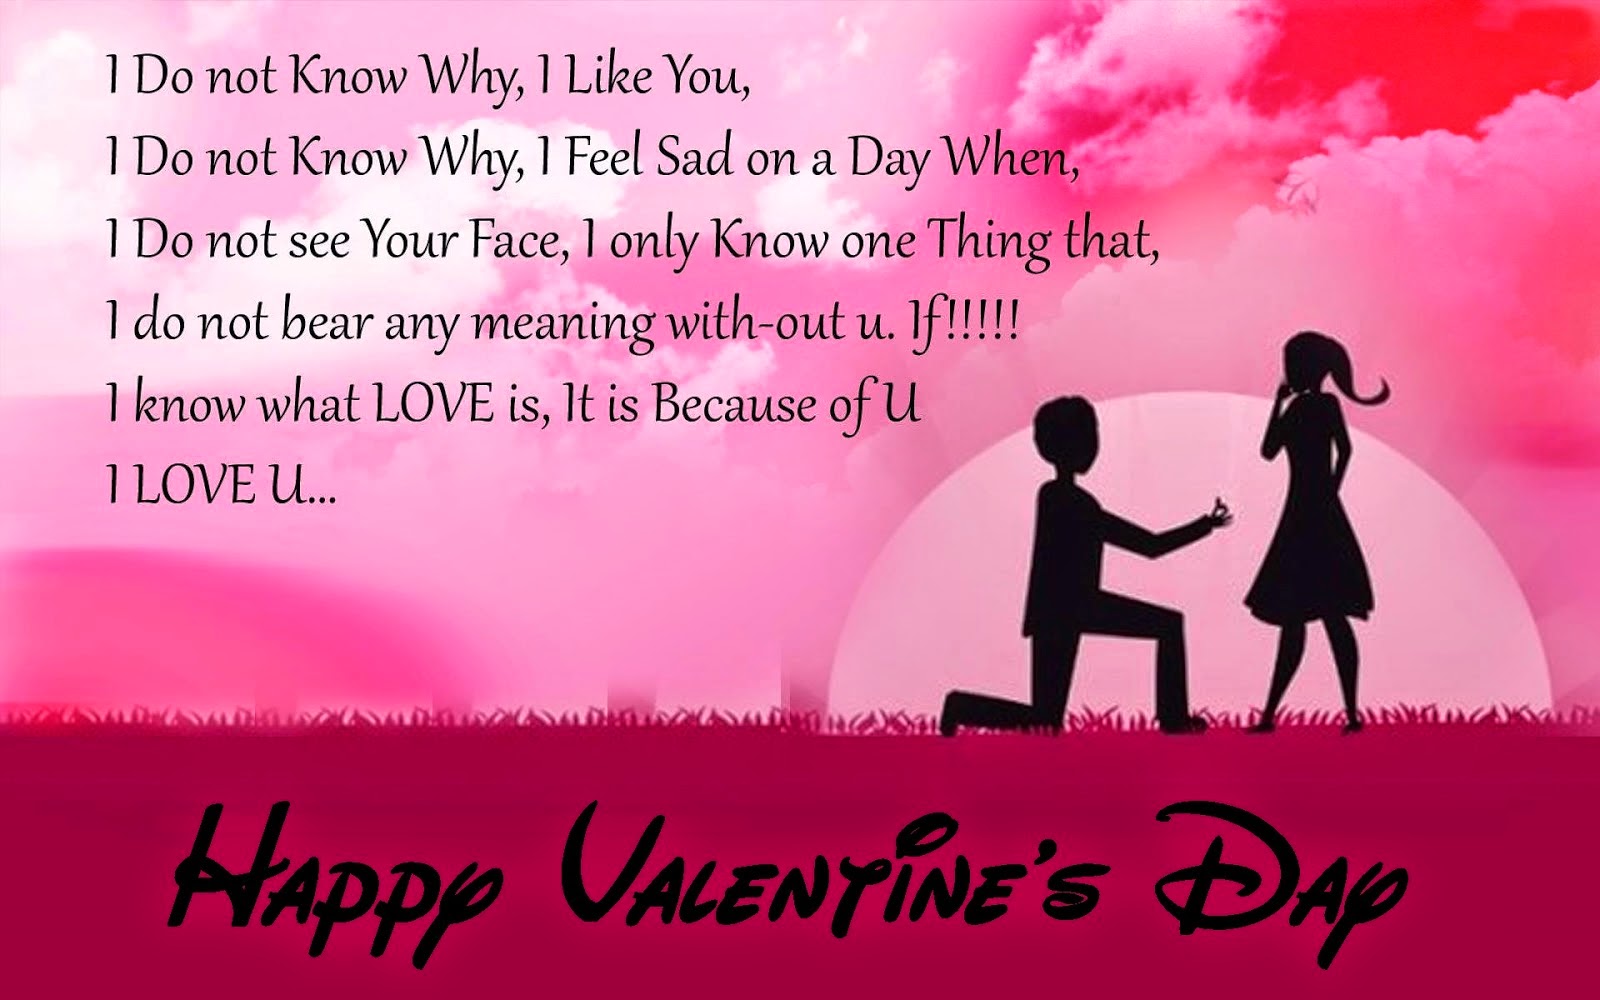 i do not know why, i like you, i do not know why, i feel sad on a day when happy valentine’ day